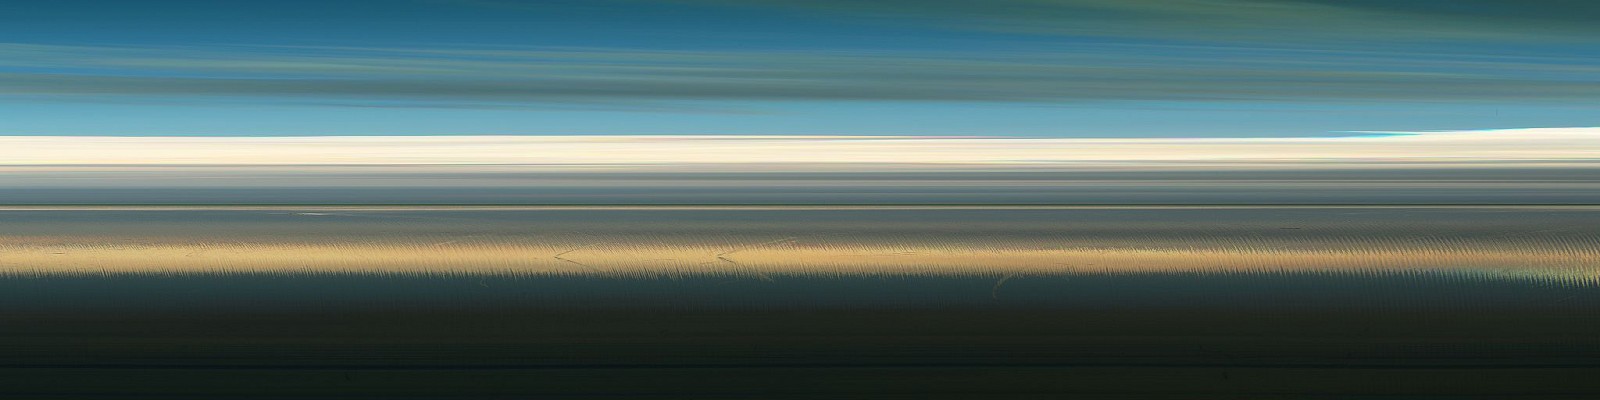 Jay Mark Johnson, FORT DE SOTO SUNSET WAVES #33, 2013 Fort De Soto, FL
archival pigment on paper, mounted on aluminum, 40 x 160 in. (101.6 x 406.4 cm)